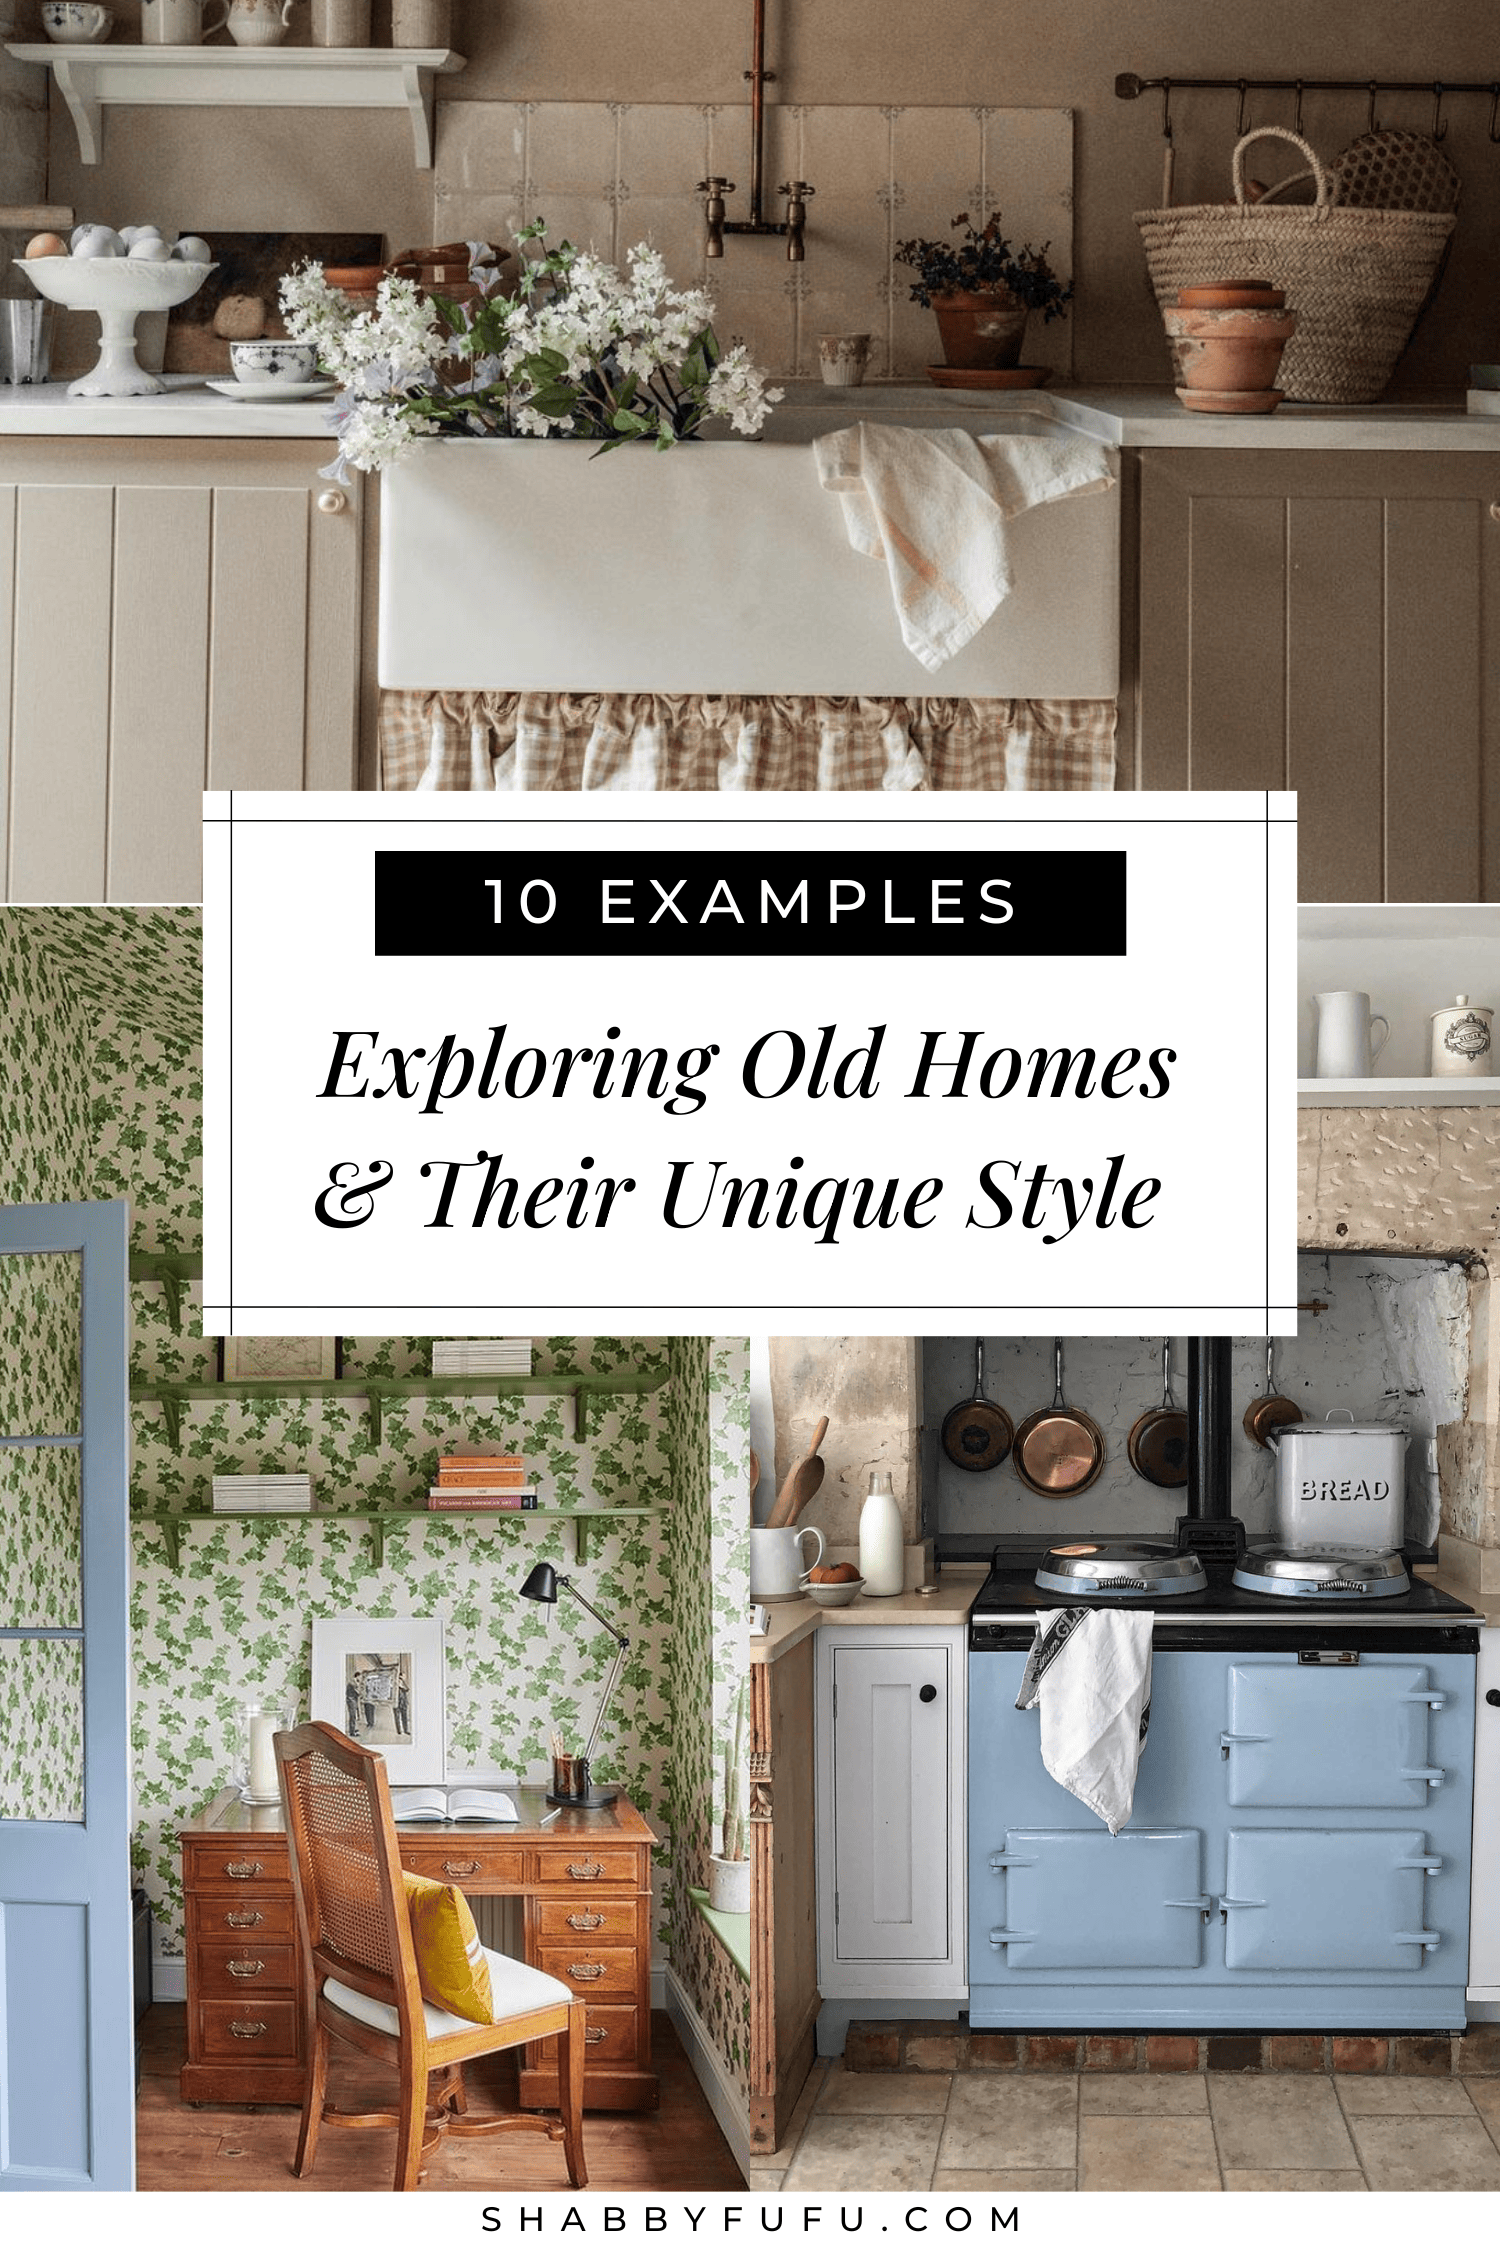 Pinterest collage featuring different indoor homes with the title "10 examples - Exploring Old Homes & Their Unique Style"